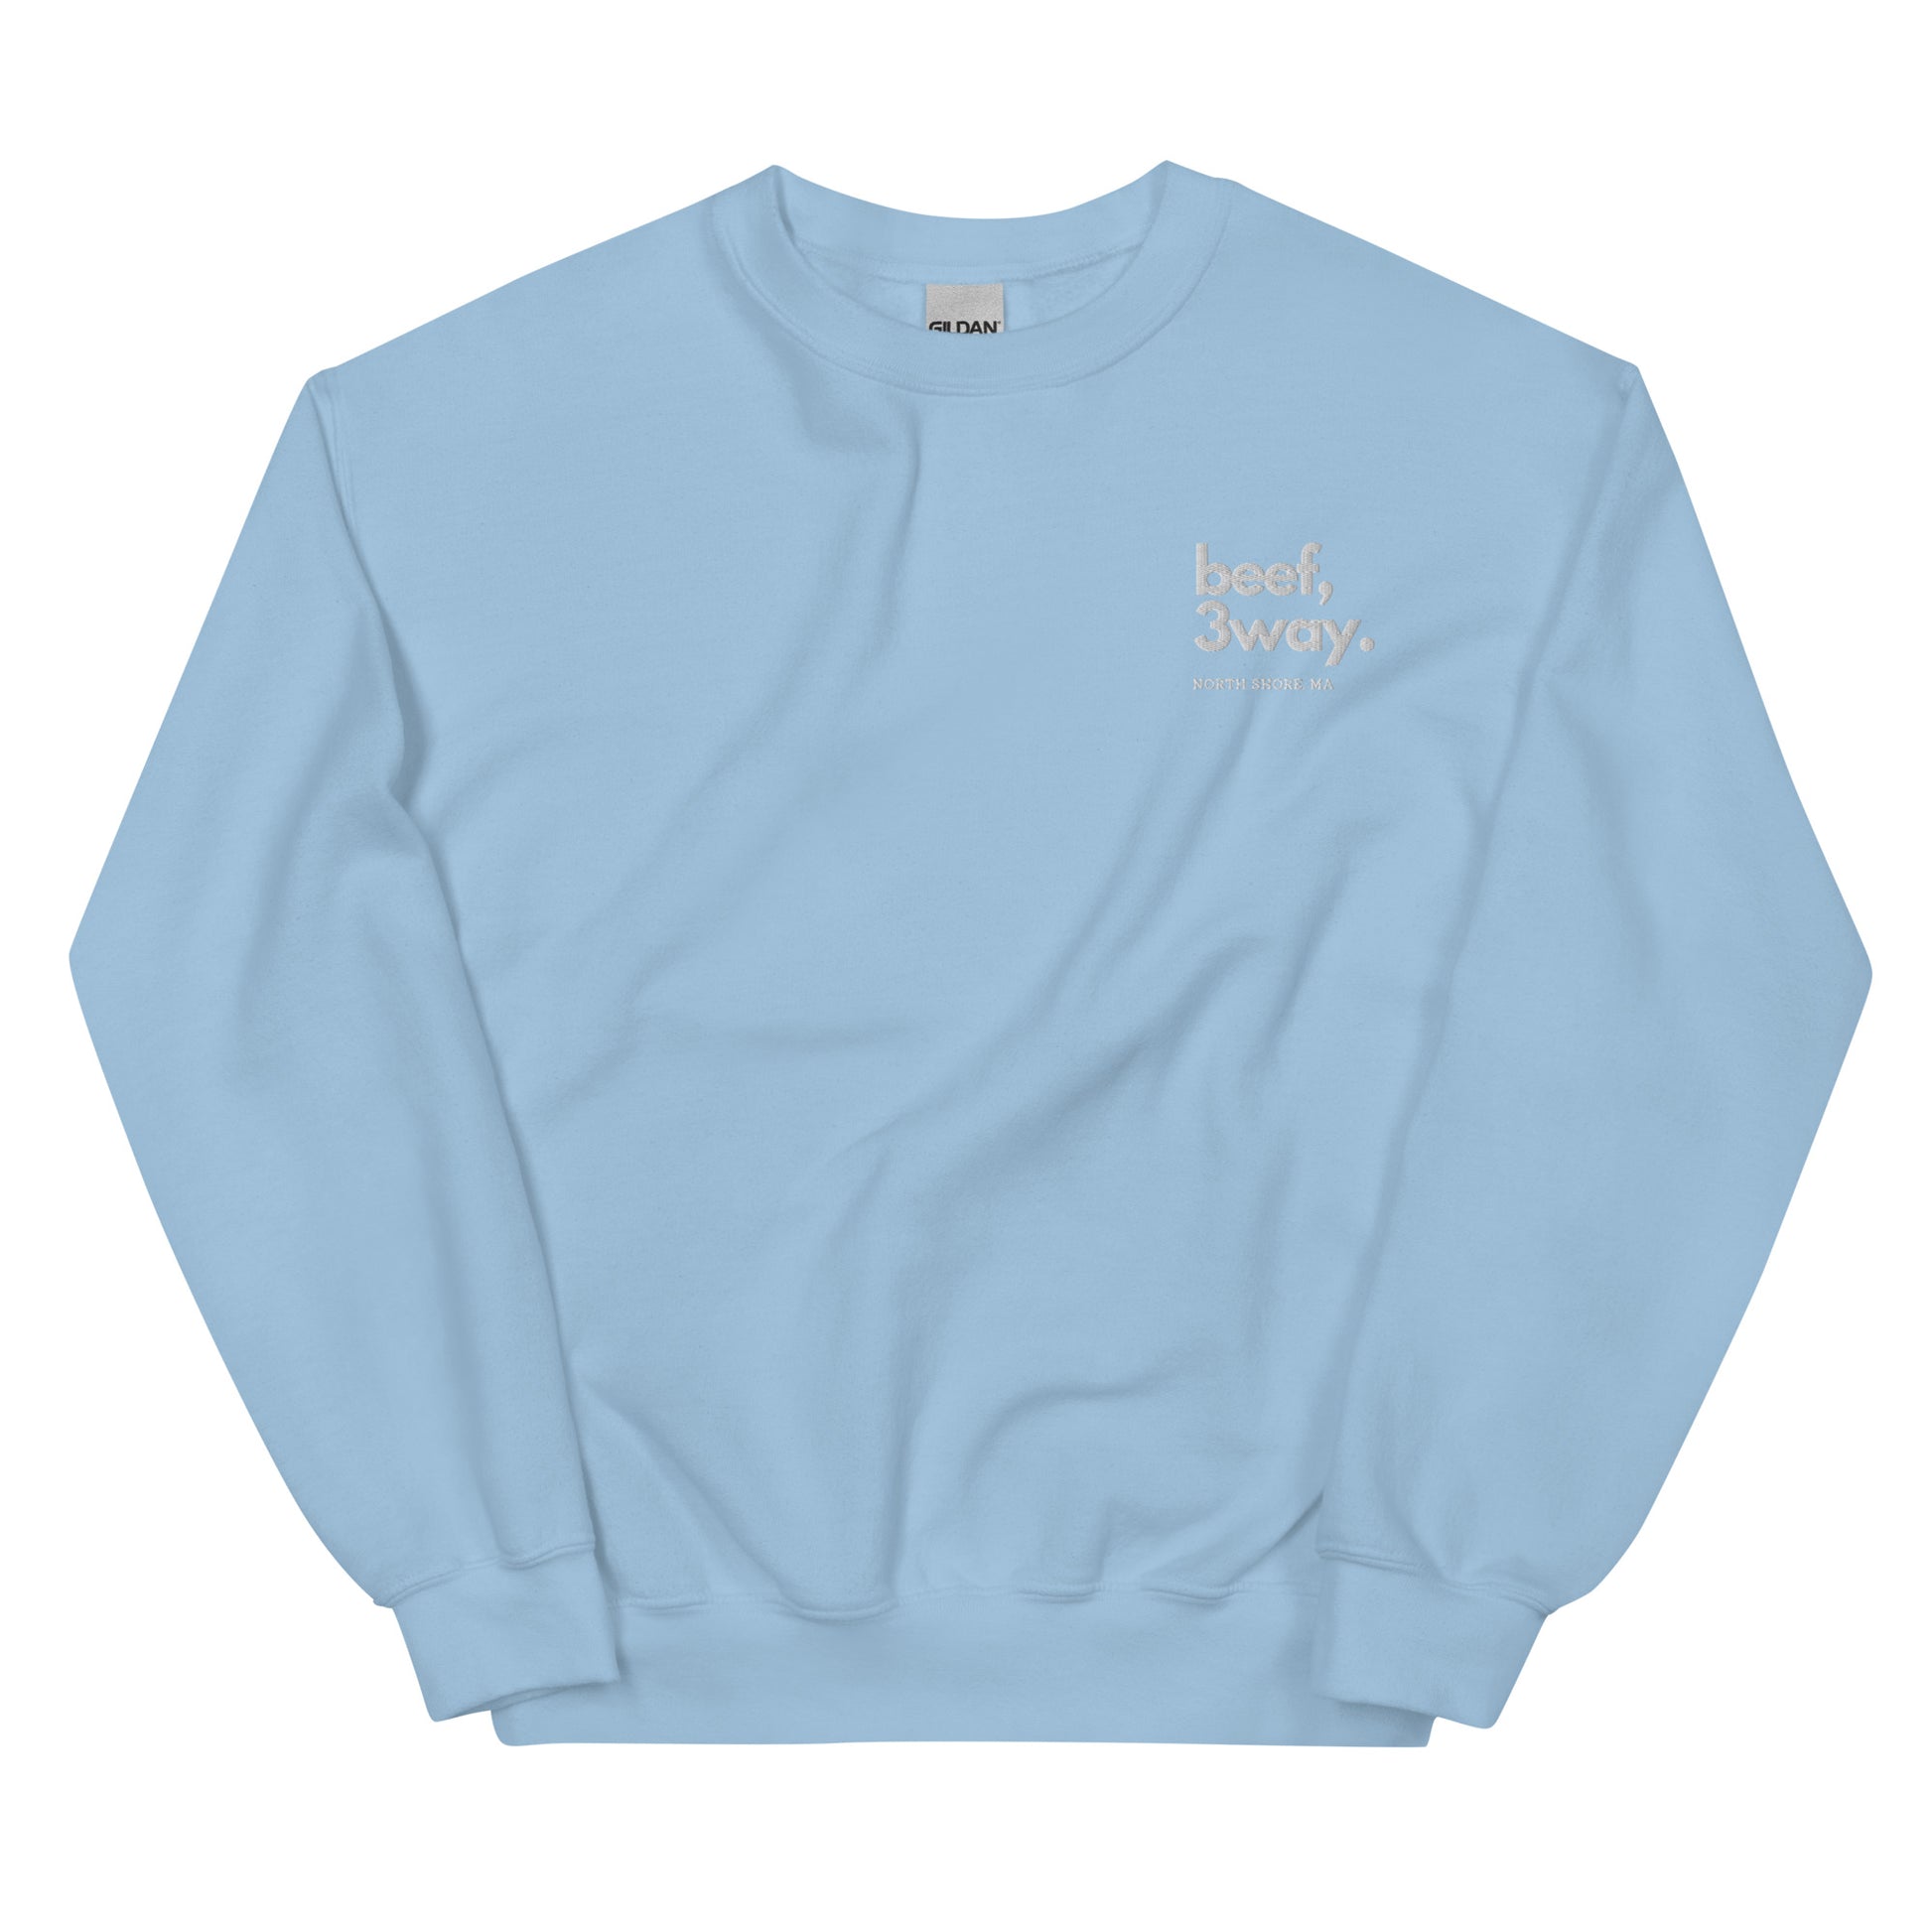 light blue crewneck that says "beef, 3way north shore ma" in white lettering